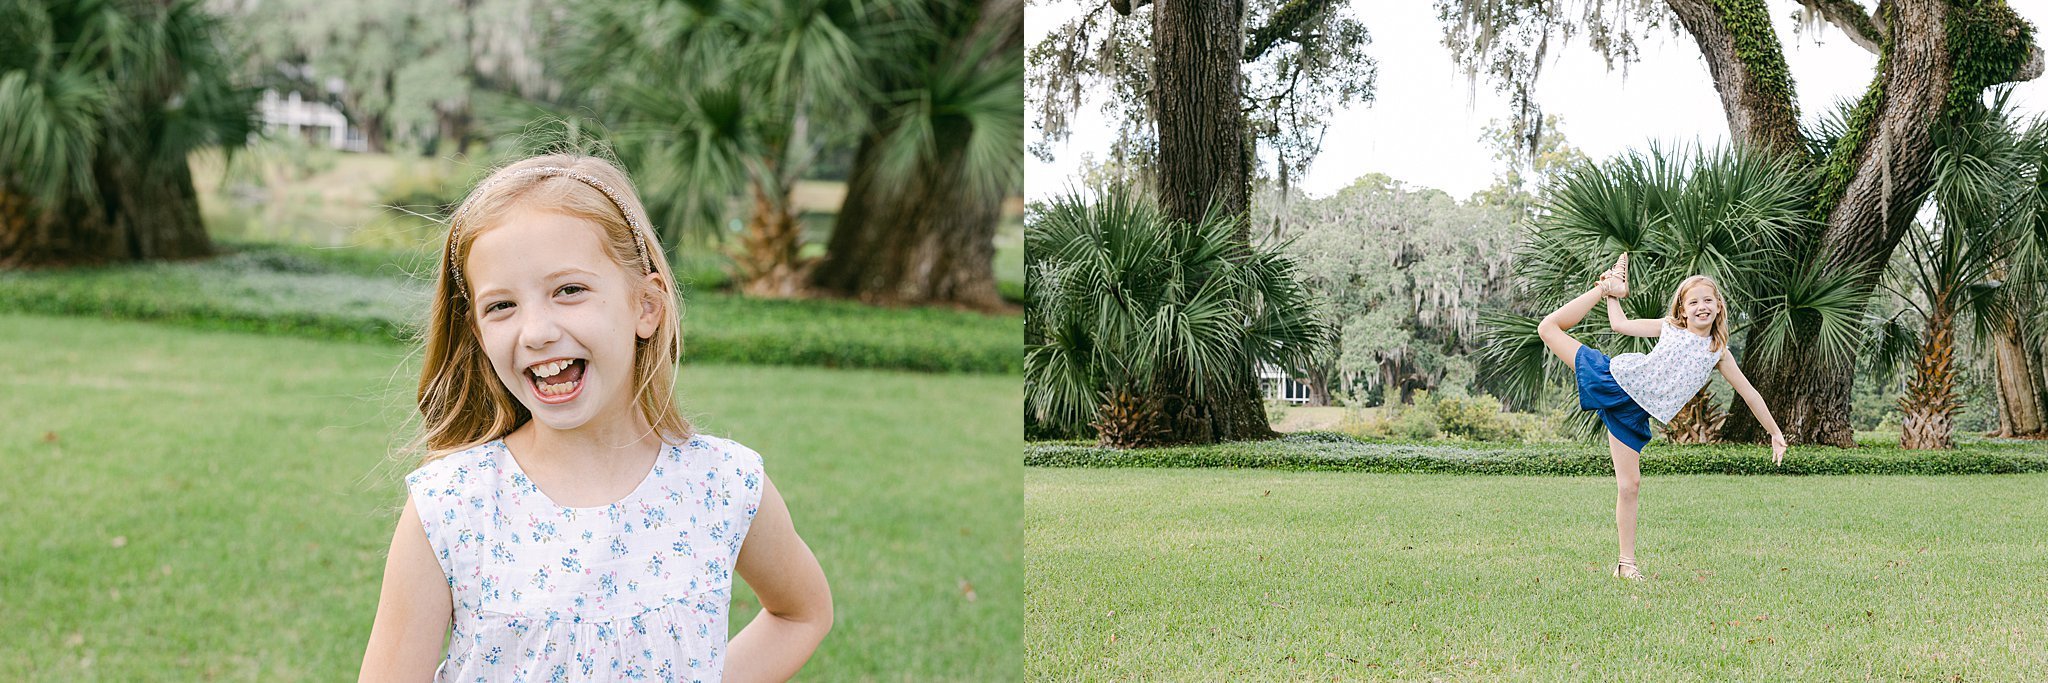 Katherine_Ives_Photography_Patton_Family_Montage_Palmetto_Bluff_10239.JPG